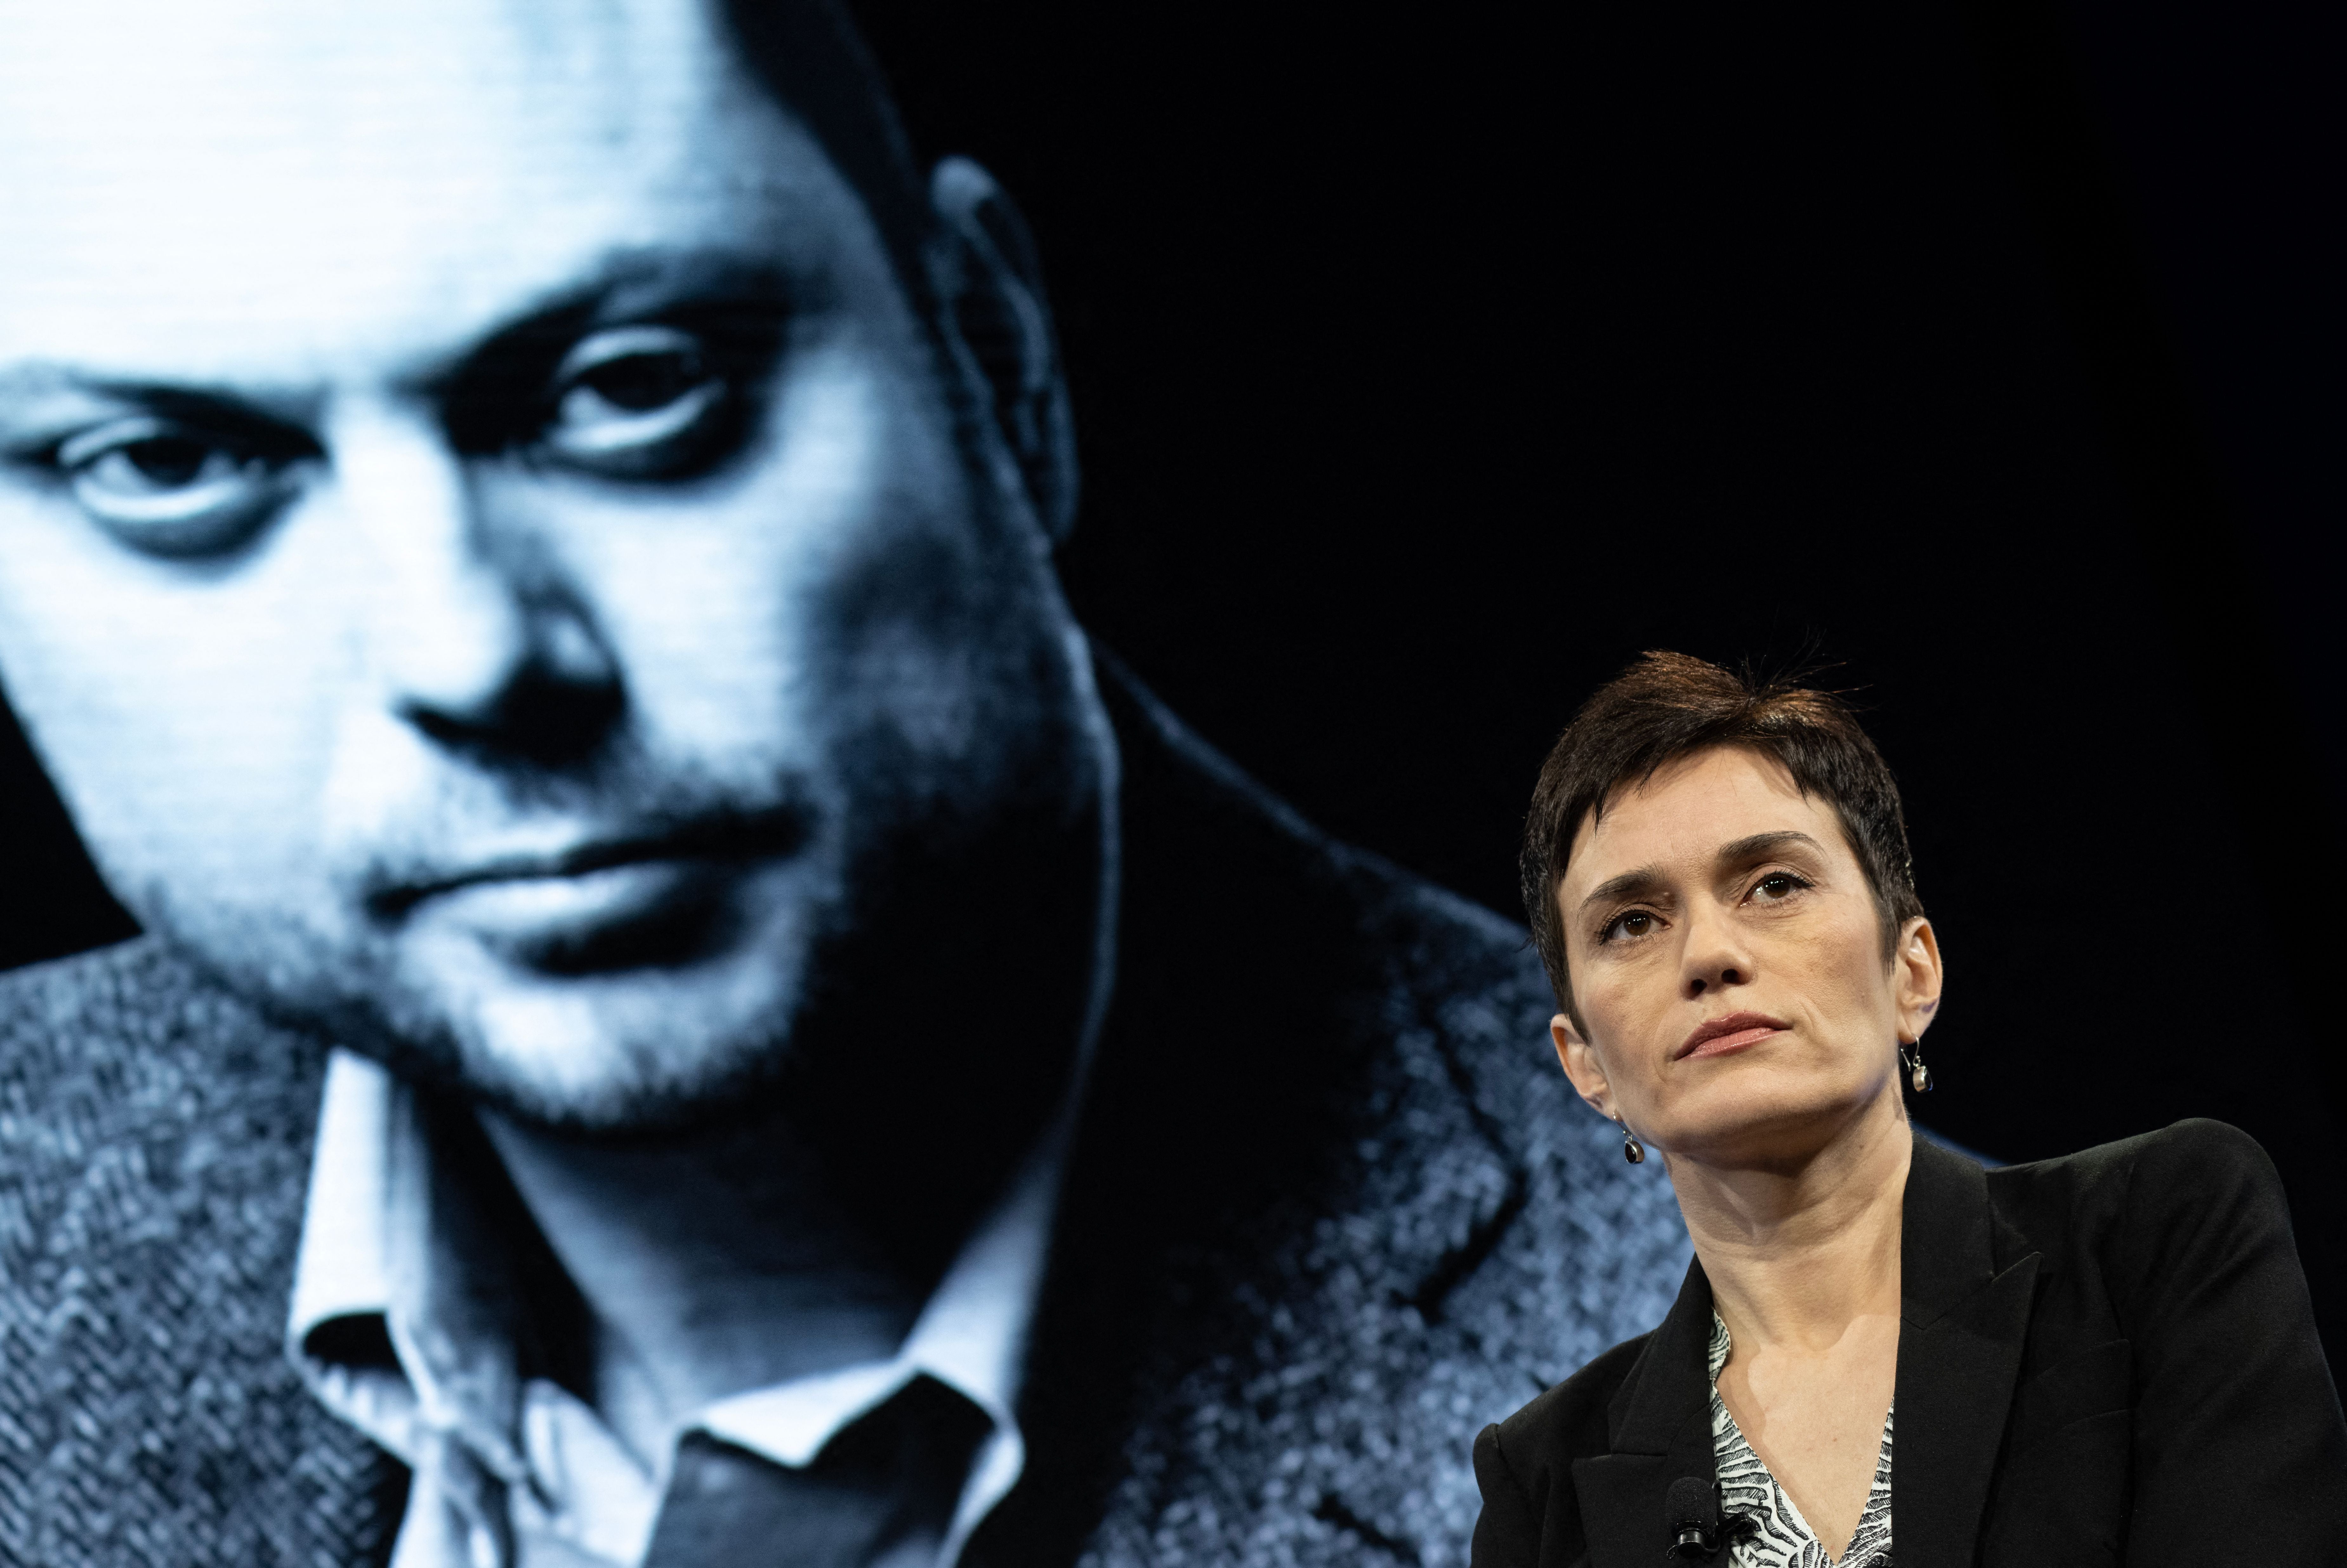 ‘They are going to make it worse for him, more psychological pressure, and then worse again. That is what they do,’ said Evgenia Kara-Murza, wife of imprisoned political activist Vladimir Kara-Murza